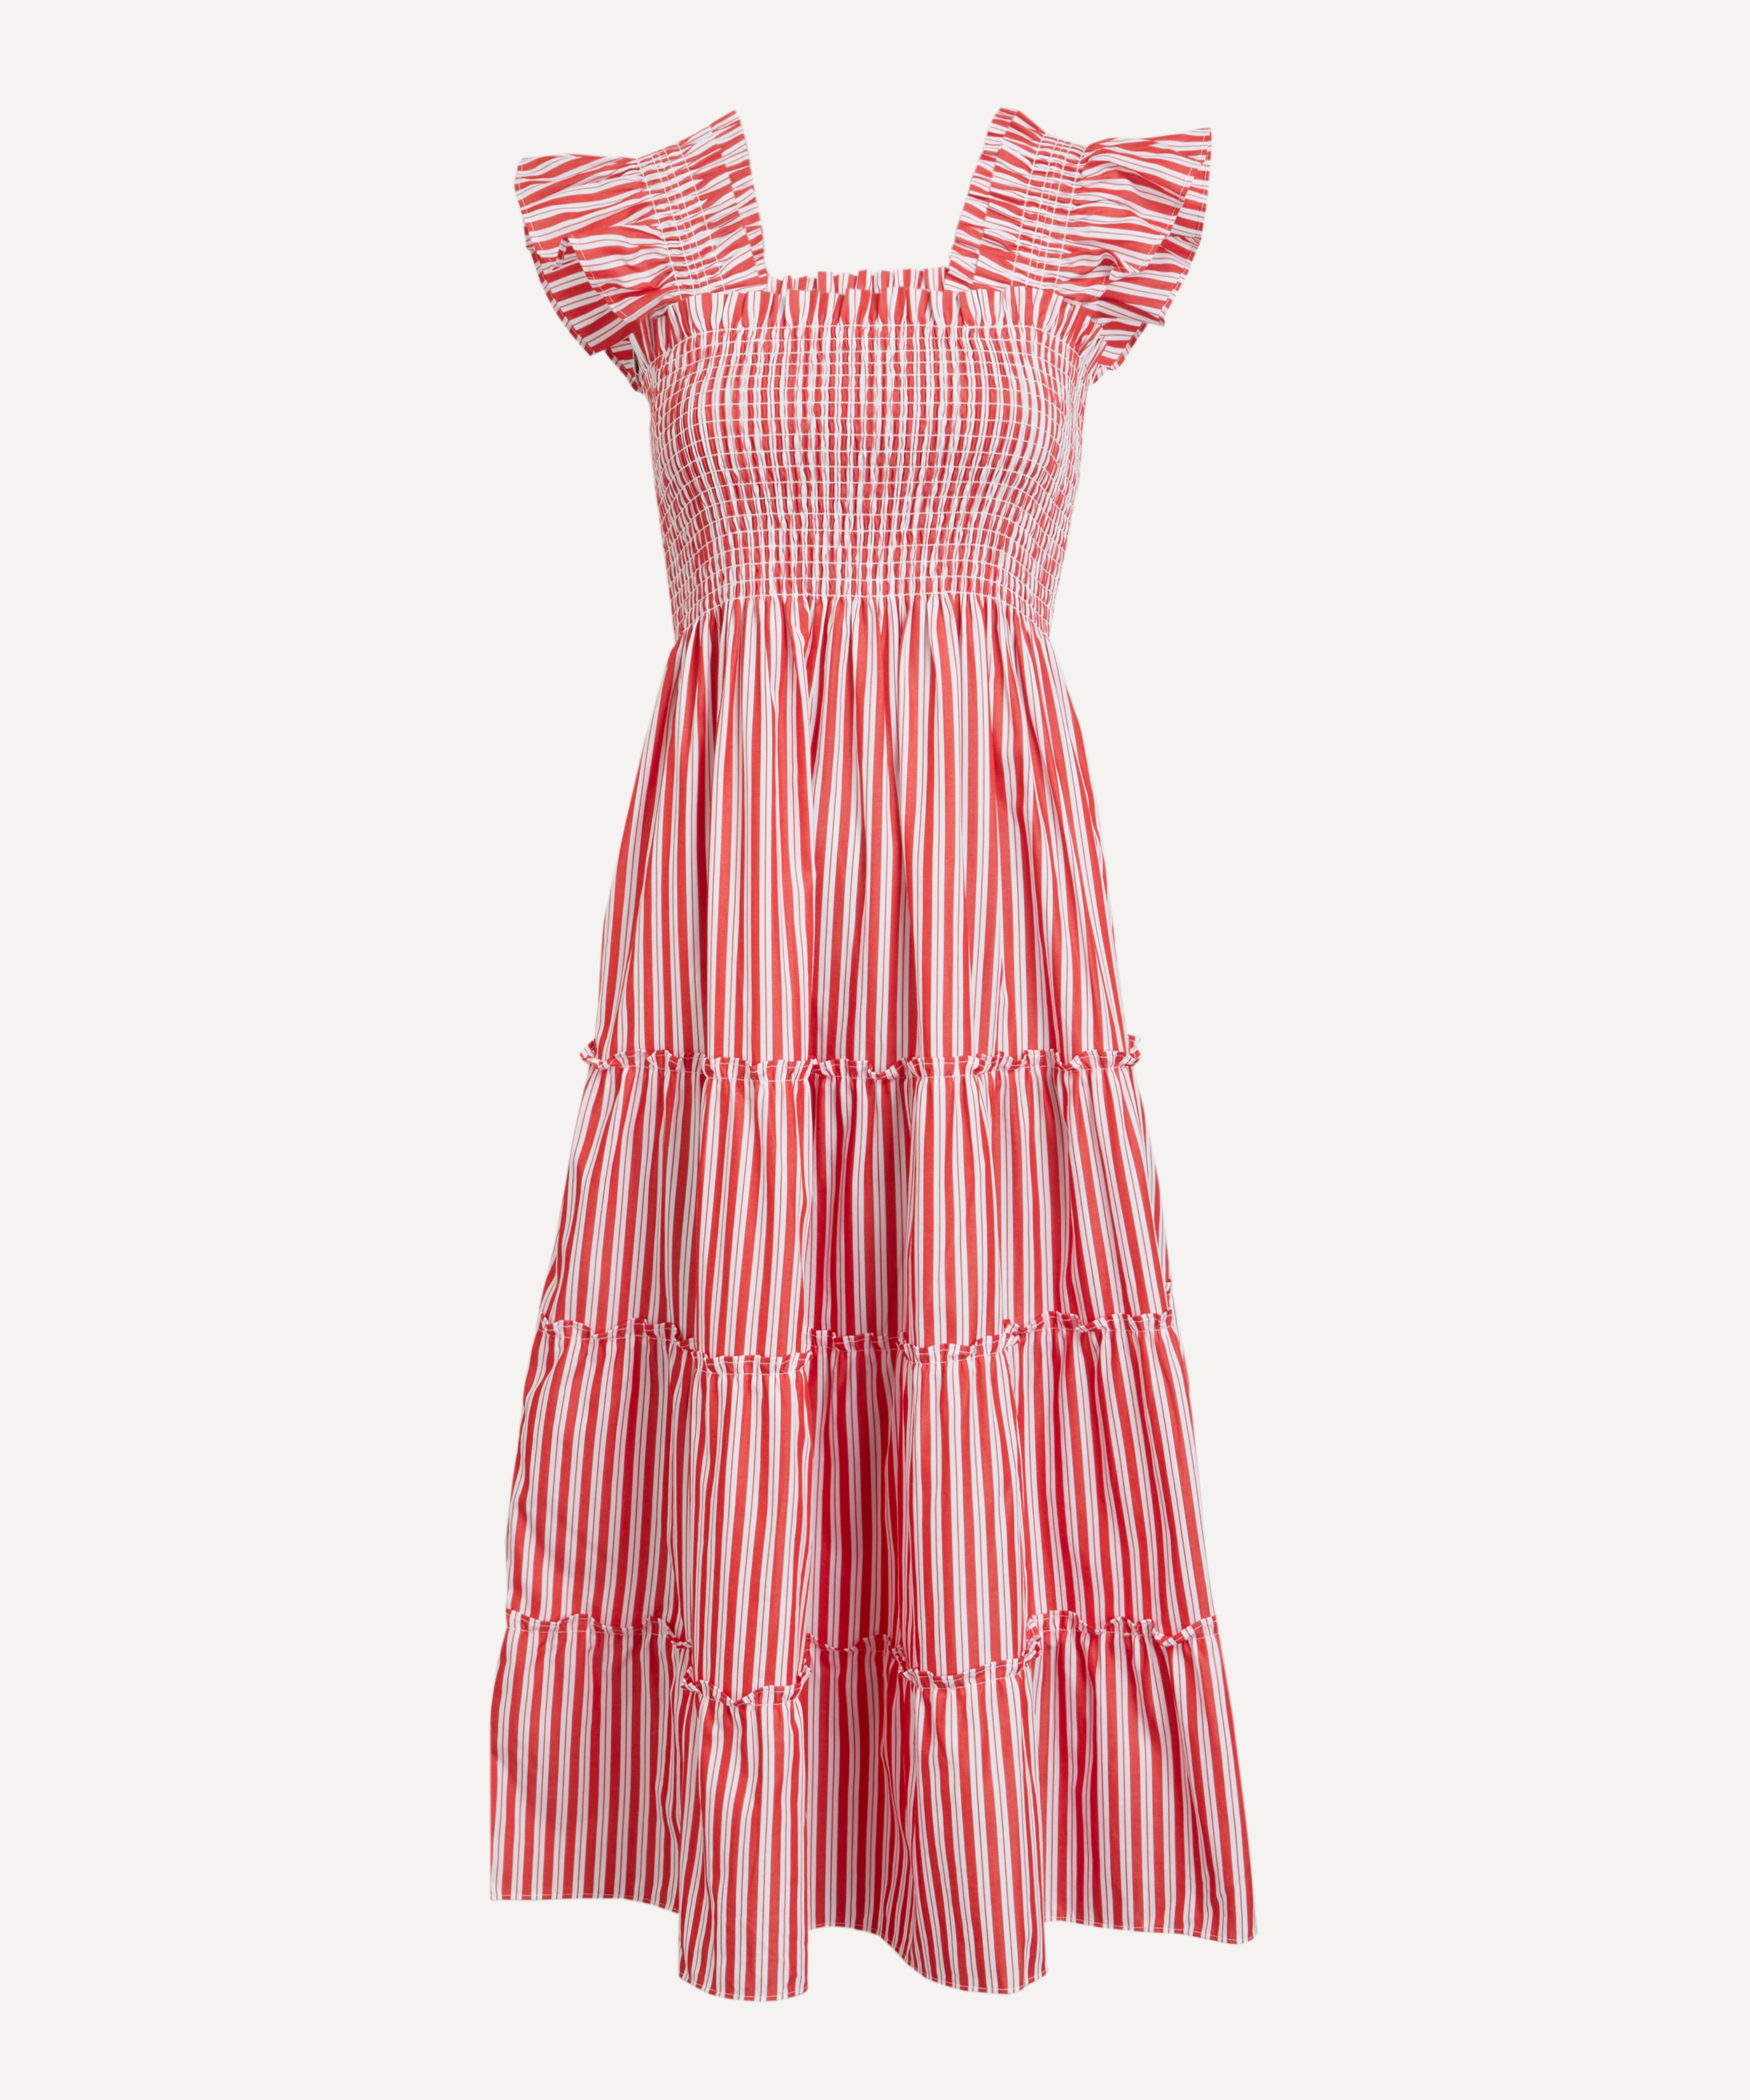 Hill House Home - Ellie Nap Dress in Red Stripe